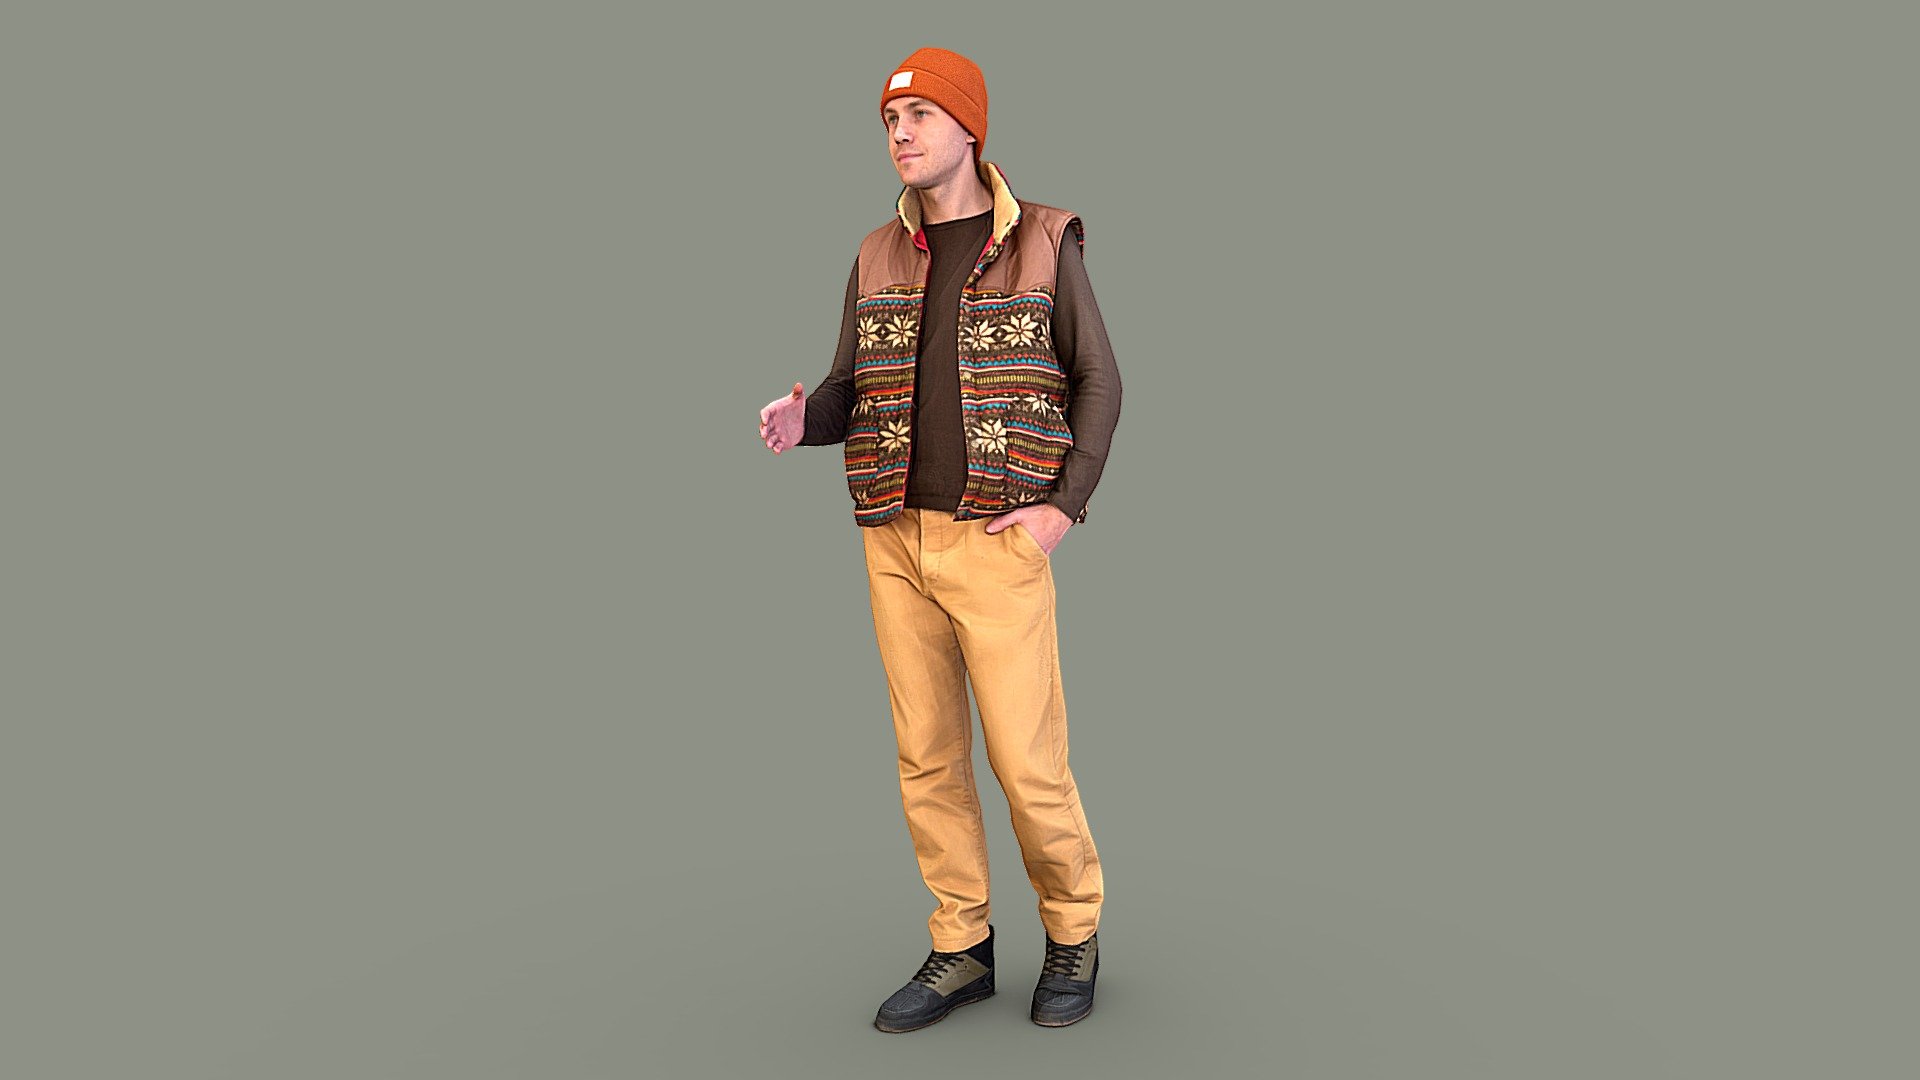 Follow us on Instagram ✌🏼

✉️ A young handsome guy holds out his hand to greet his friend. He is wearing a warm vest with a small geometric pattern, a brown sweater, camel-colored trousers, dark sneakers, and an orange hat.

🦾 This model will be an excellent mid-range participant. It does not need to be very close and try to see the details, it reveals and demonstrates its texture as much as possible in case of a certain distance from the foreground.

⚙️ Photorealistic Casual Character 3d model ready for Virtual Reality (VR), Augmented Reality (AR), games and other real-time apps. Suitable for the architectural visualization and another graphical projects. 50 000 polygons per model.

KXLK09 - Greetings - 3D model by kanistra 3d model